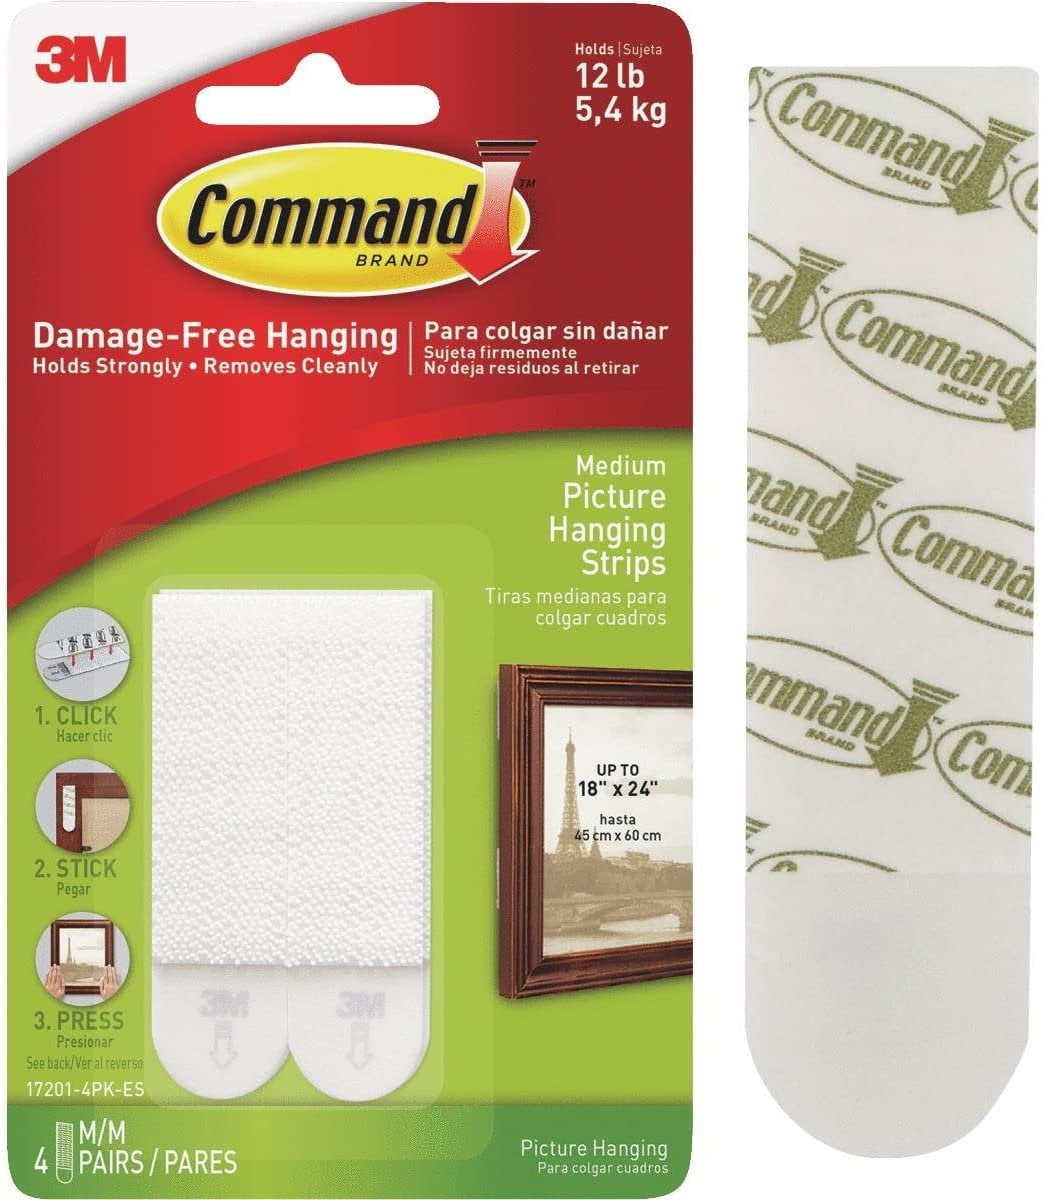 Command 4 Pack 3M Size Medium Damage Free Hanging Holds 12 lbs Lot of 4 b 